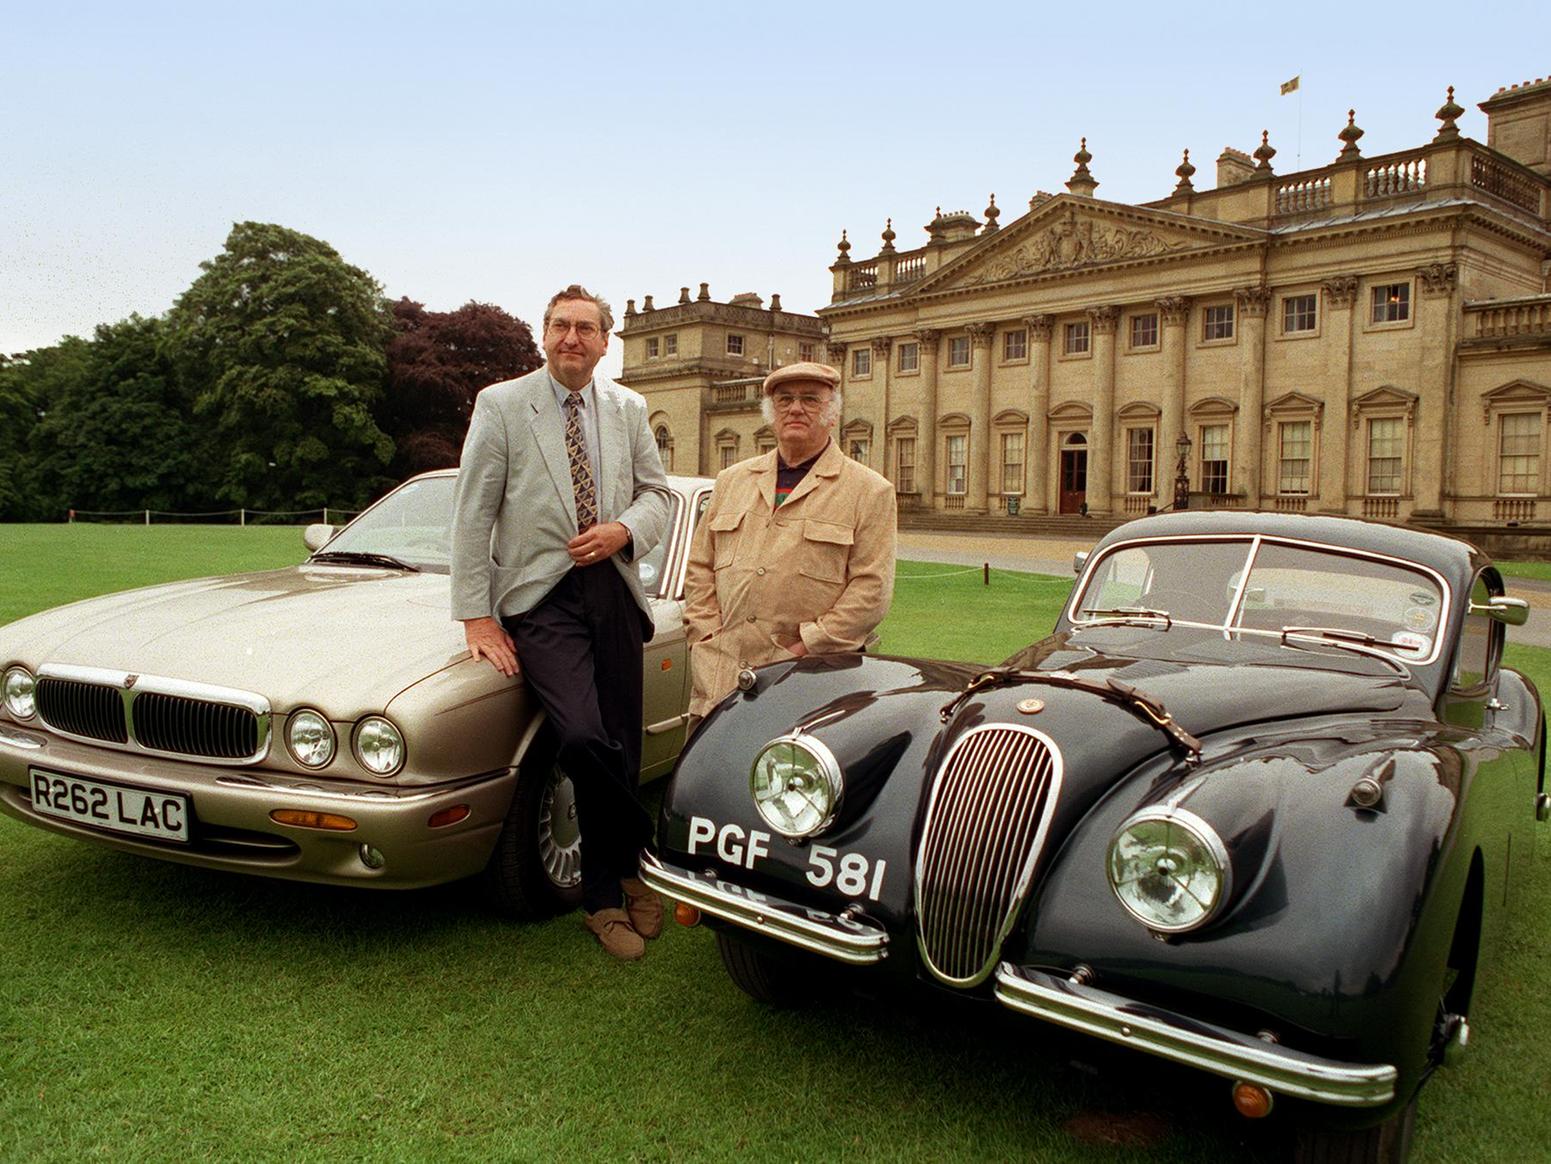 Harewood House was the setting for the UKs largest Jaguar rally in September 1998. Nigel Thorly, left, poses with his 1998 Jaguar XJ8 while Paul Beaumont shows off his 1954 Jaguar XK120 to preview the event.